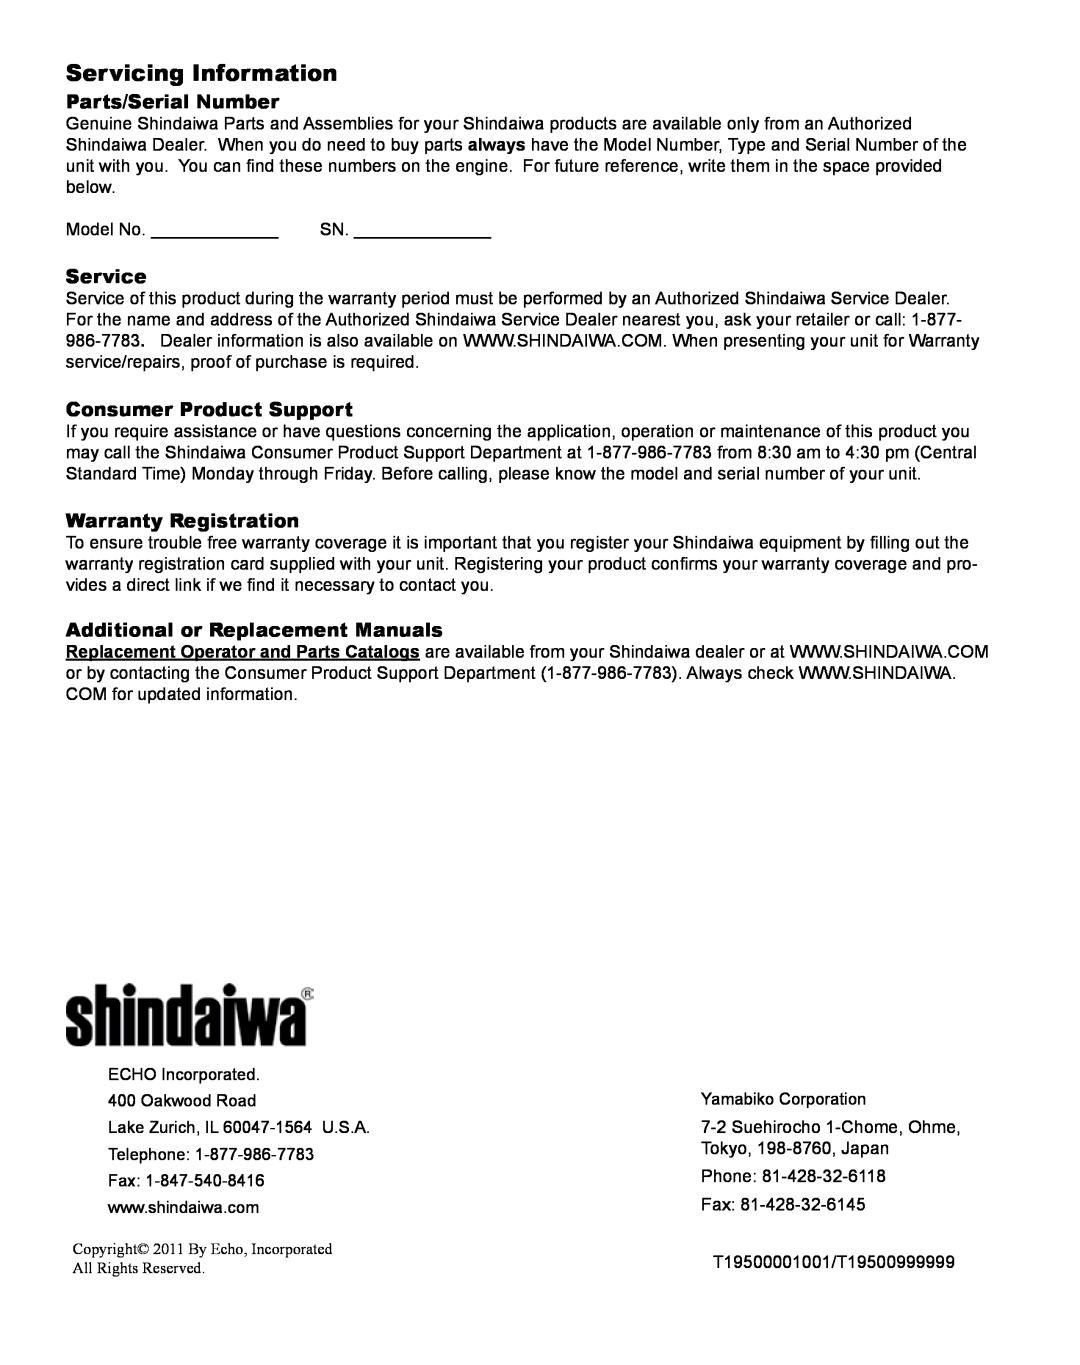 Shindaiwa T230 manual Servicing Information, Parts/Serial Number, Service, Consumer Product Support, Warranty Registration 